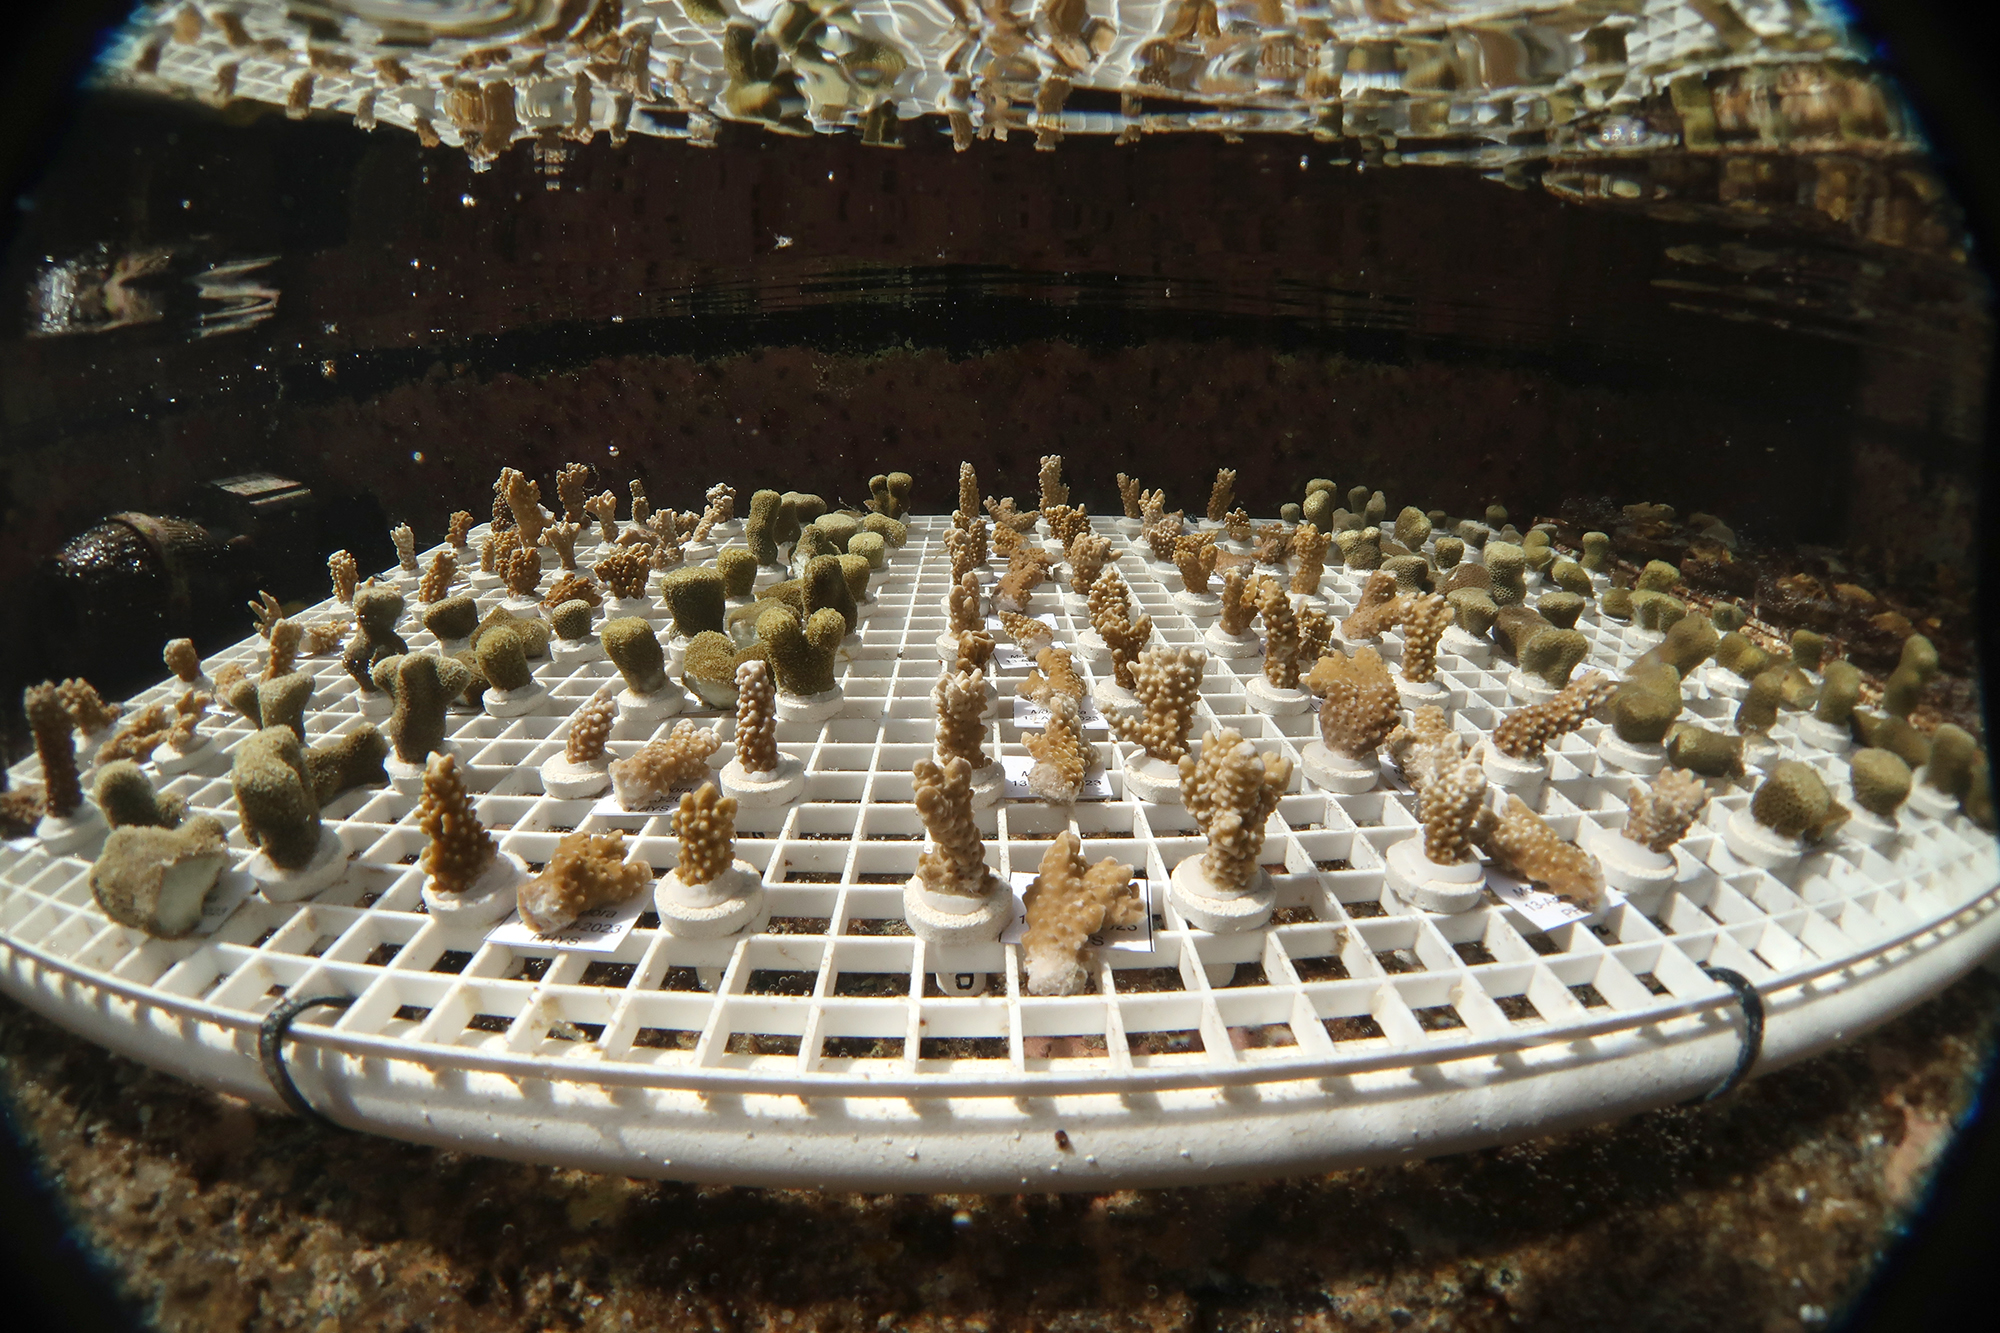 Small samples of brown corals placed on grided trays growing underwater